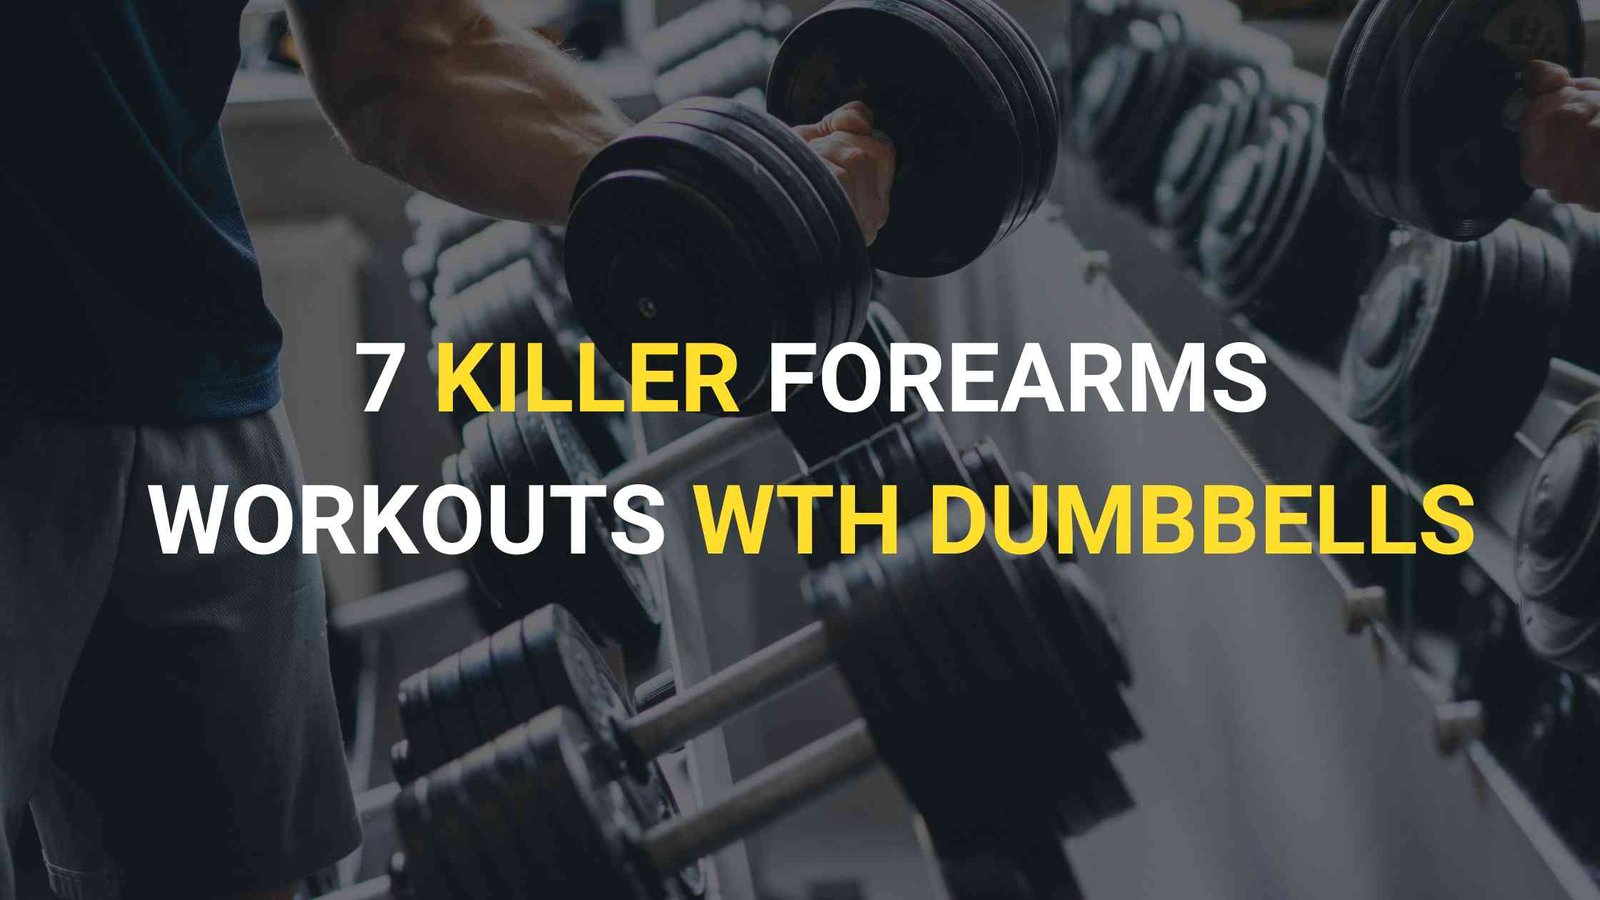 You are currently viewing 7 Killer Dumbbell Exercises for Forearms